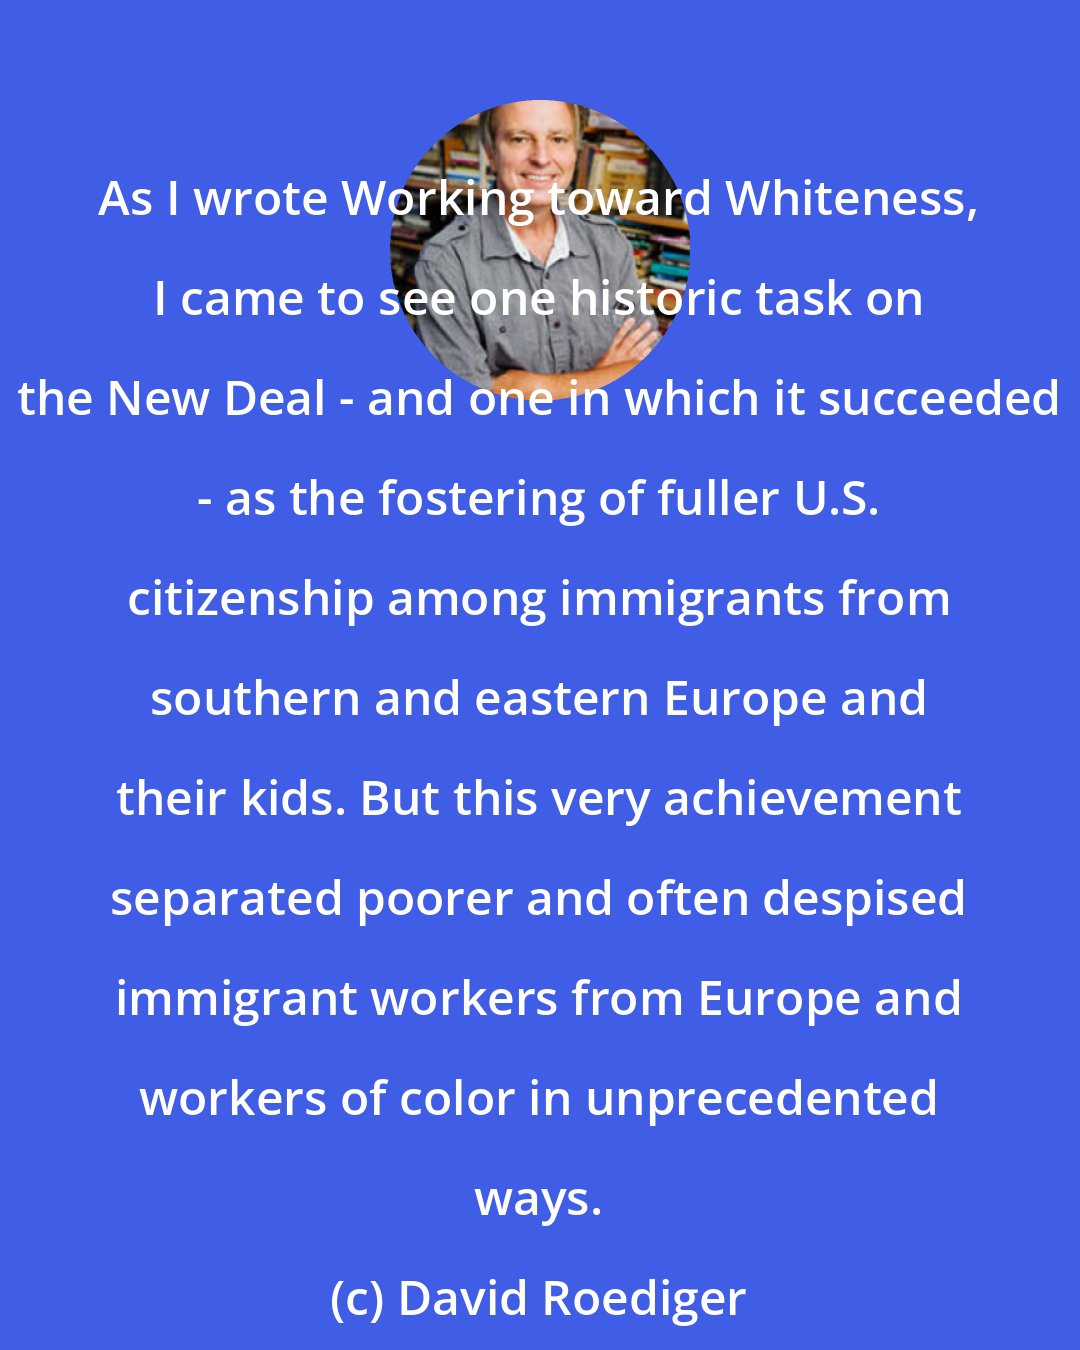 David Roediger: As I wrote Working toward Whiteness, I came to see one historic task on the New Deal - and one in which it succeeded - as the fostering of fuller U.S. citizenship among immigrants from southern and eastern Europe and their kids. But this very achievement separated poorer and often despised immigrant workers from Europe and workers of color in unprecedented ways.